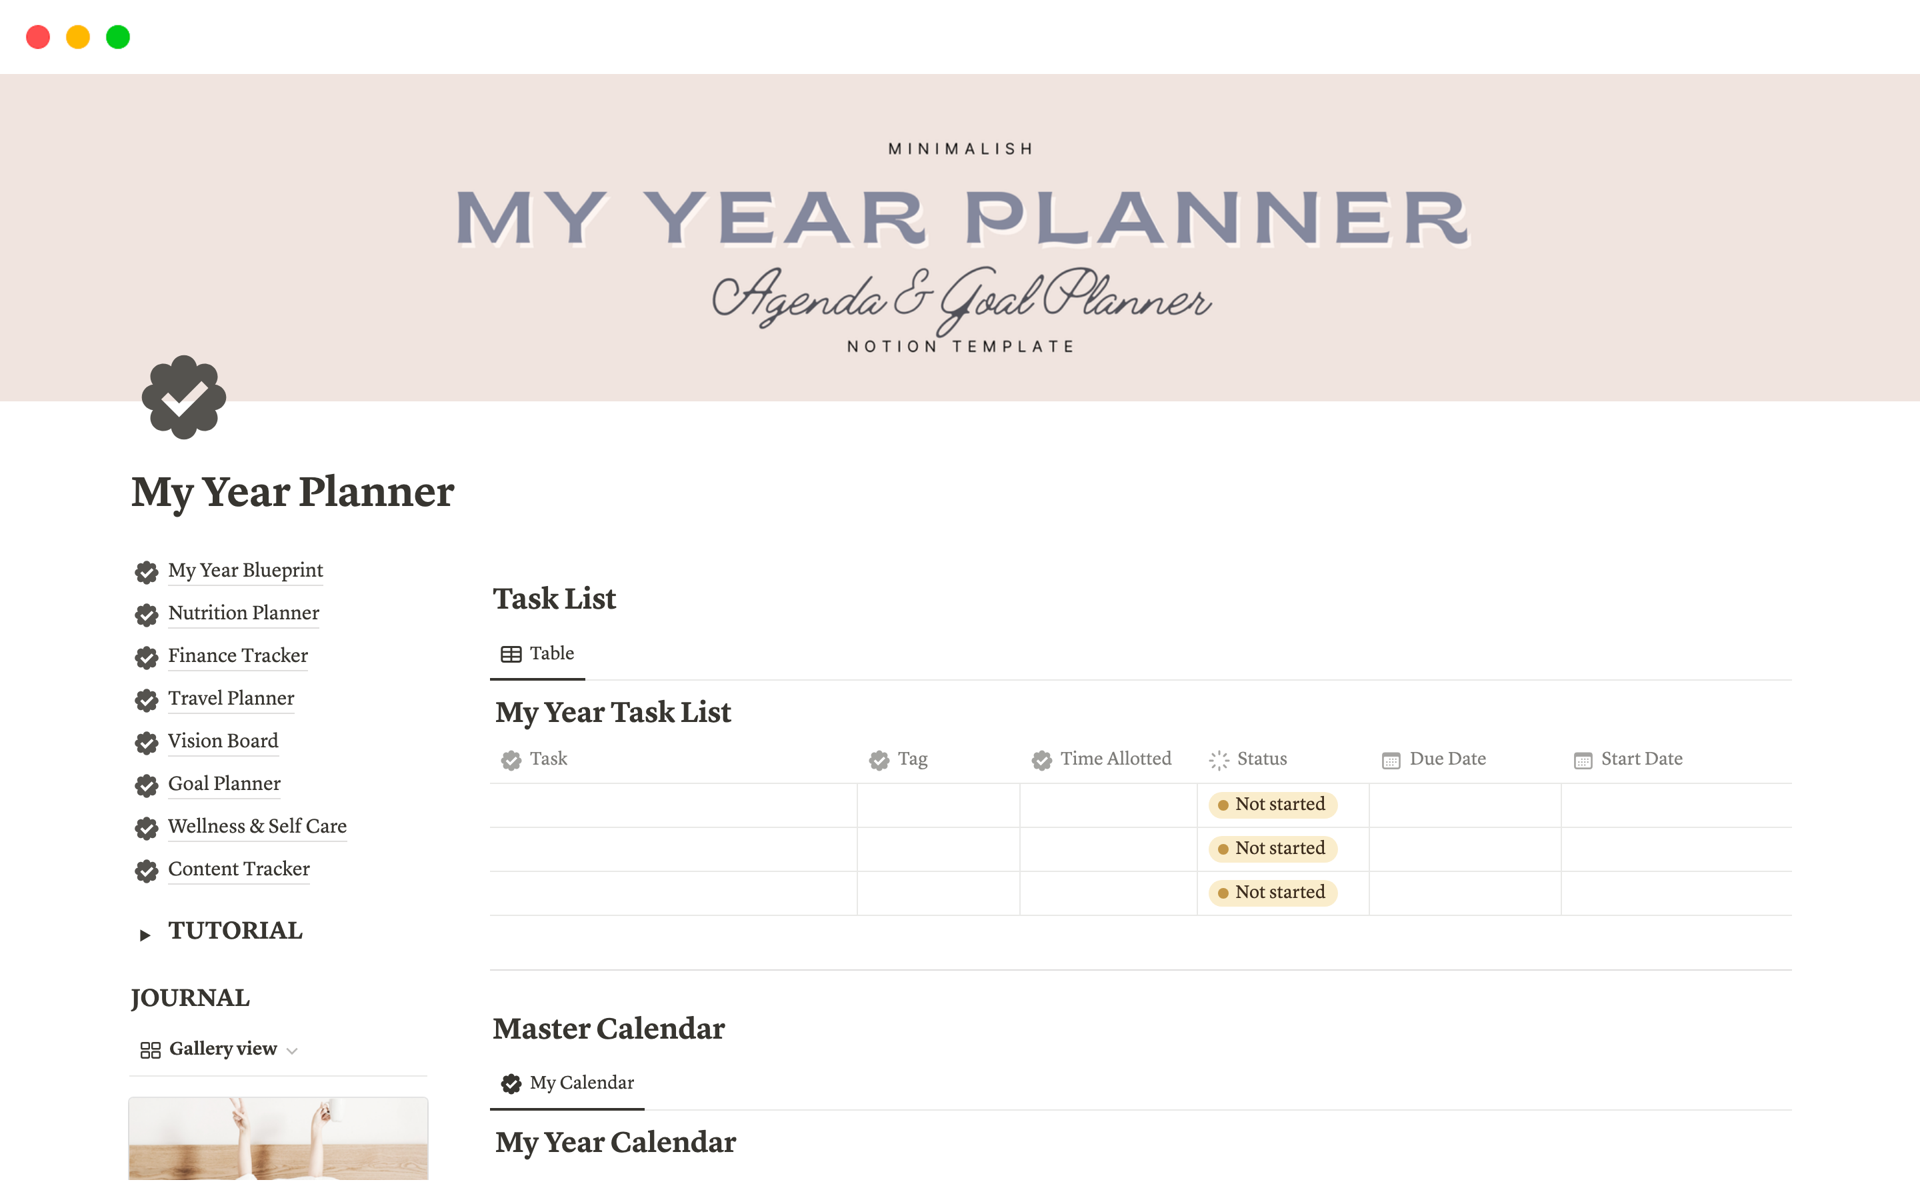 My Year Planner Notion Template with everything you need to plan your entire year in Notion from to dos to meal planning to content tracking and more.